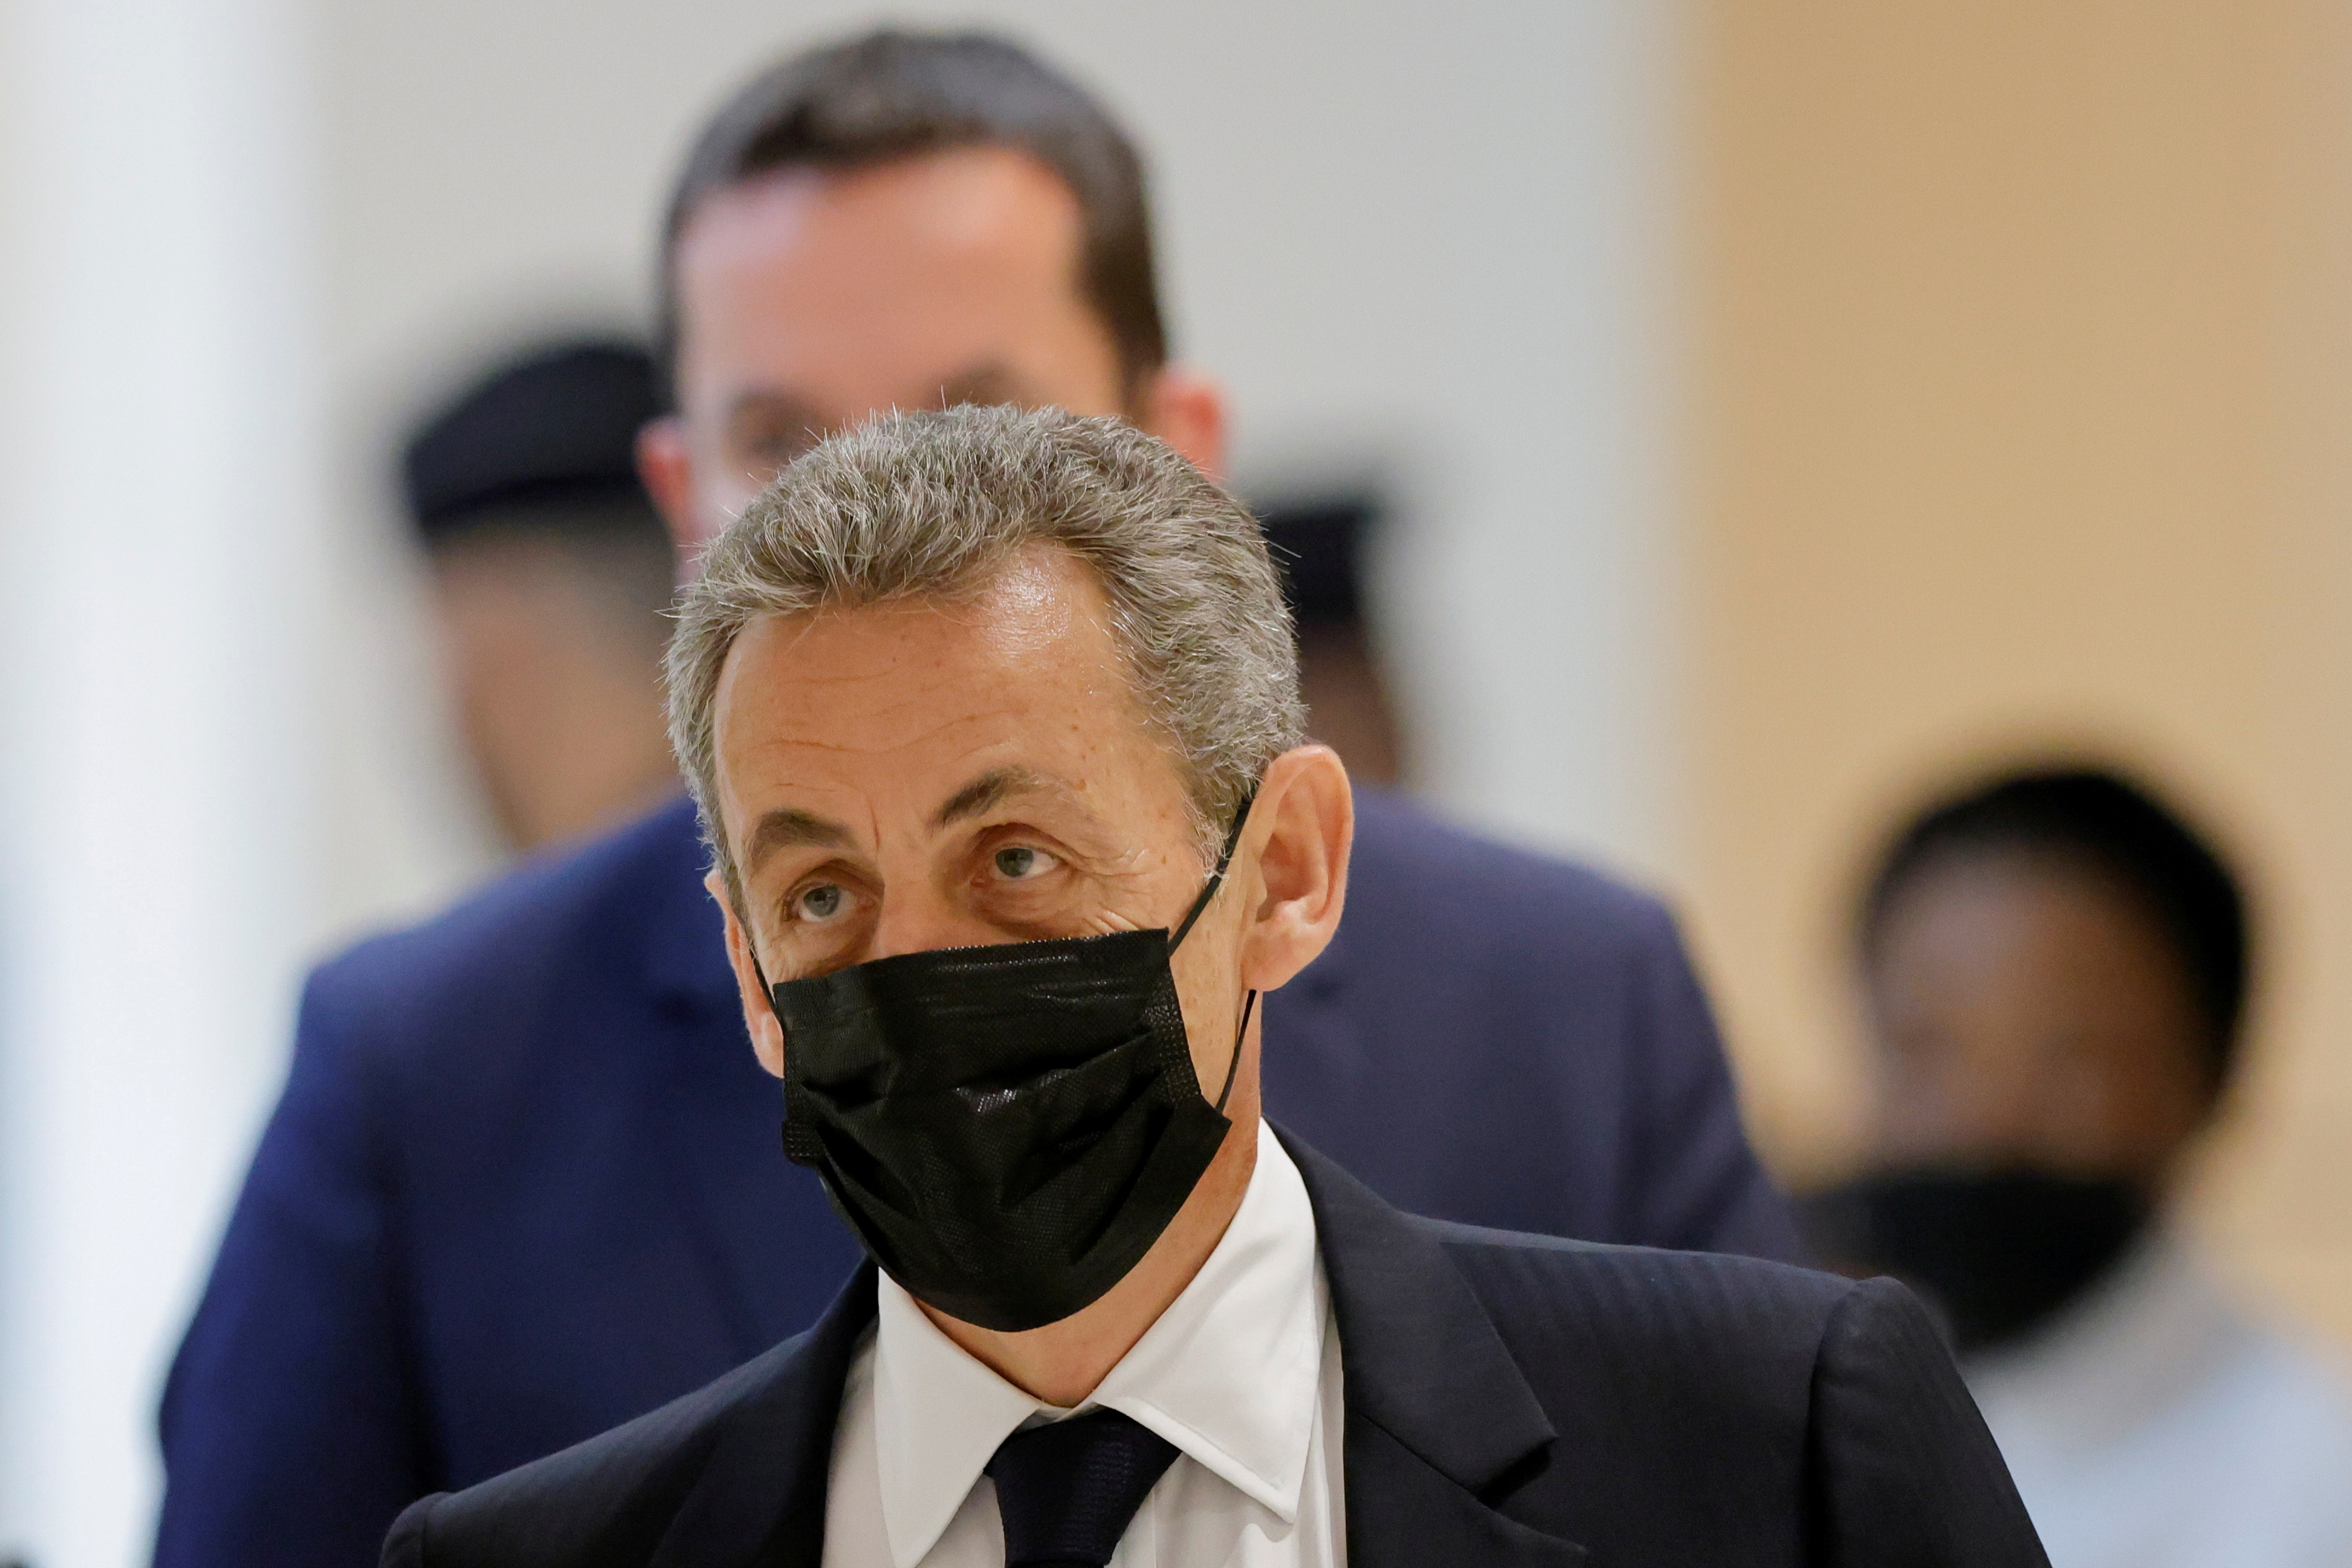 The Bygmalion affair: Nicolas Sarkozy and 13 other defendants on trial in Paris